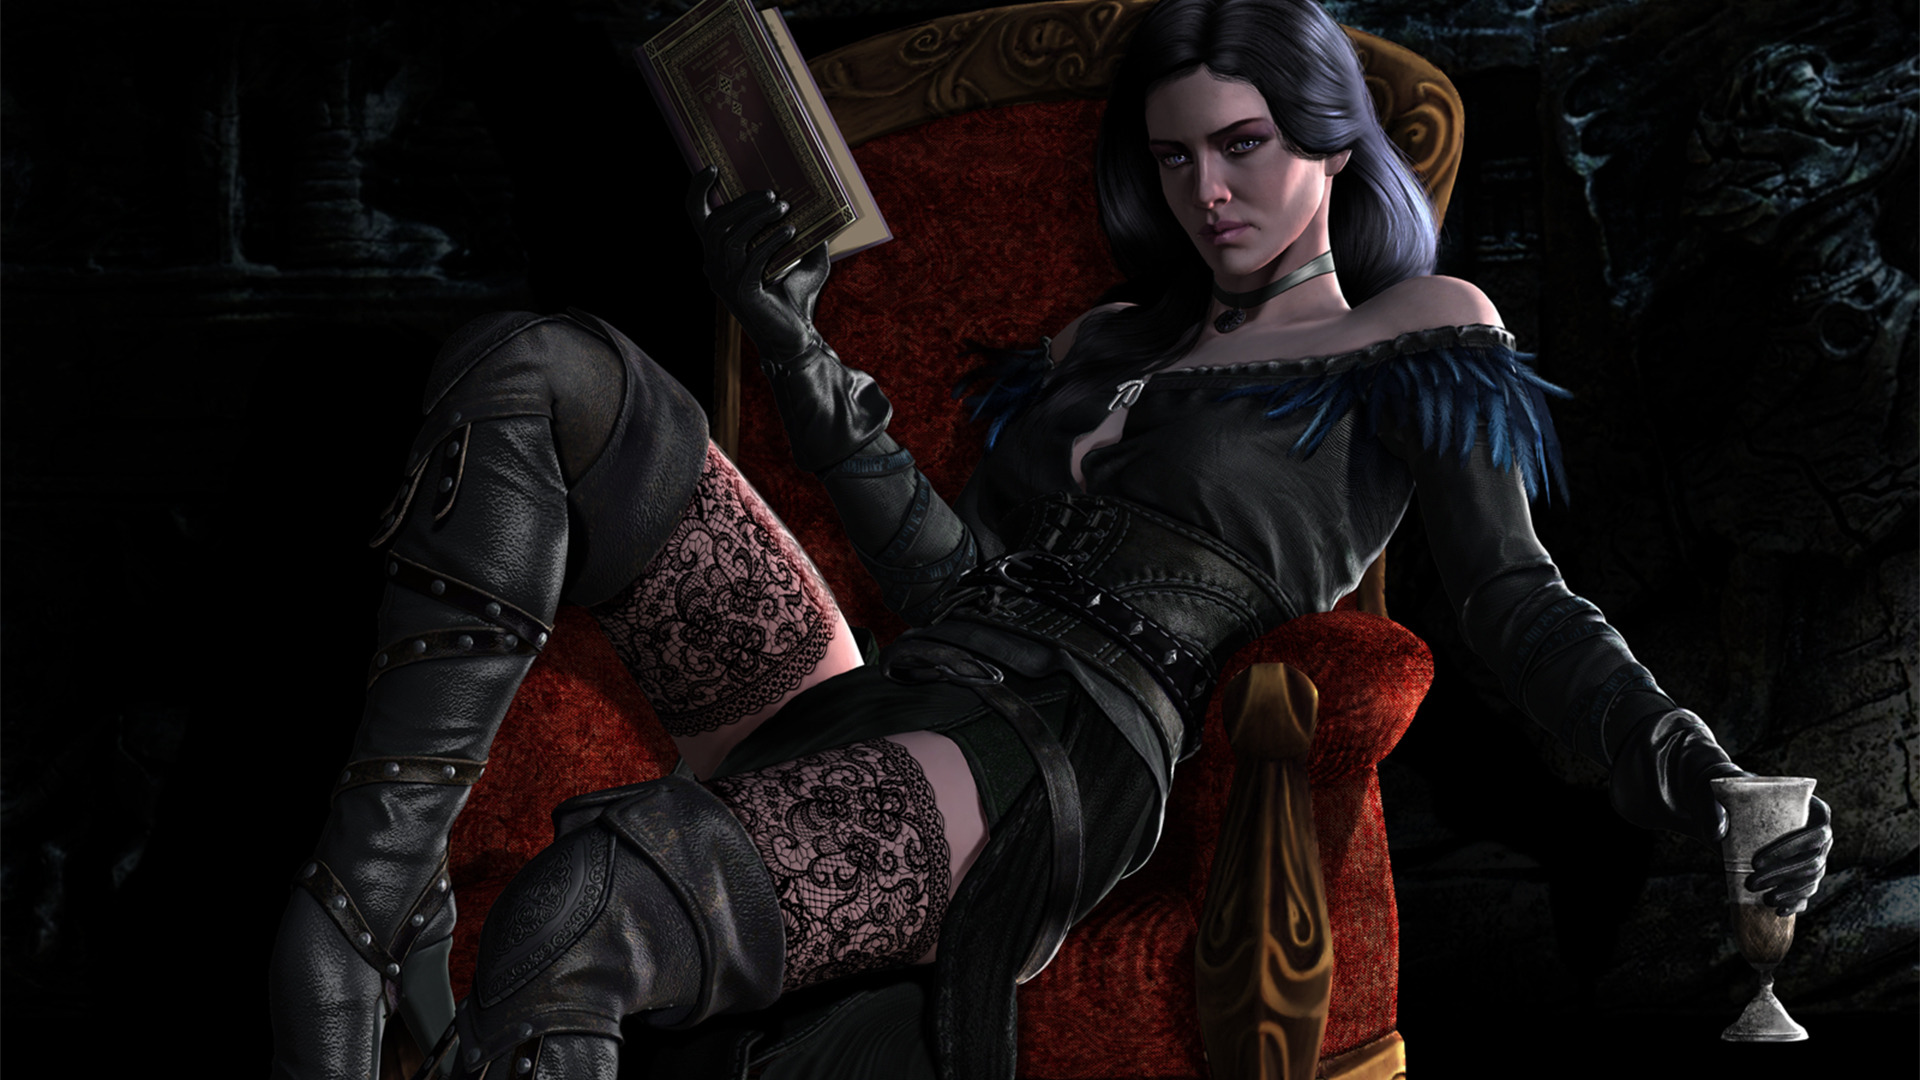 Yennefer of vengerberg the witcher 3 voiced standalone follower фото 9